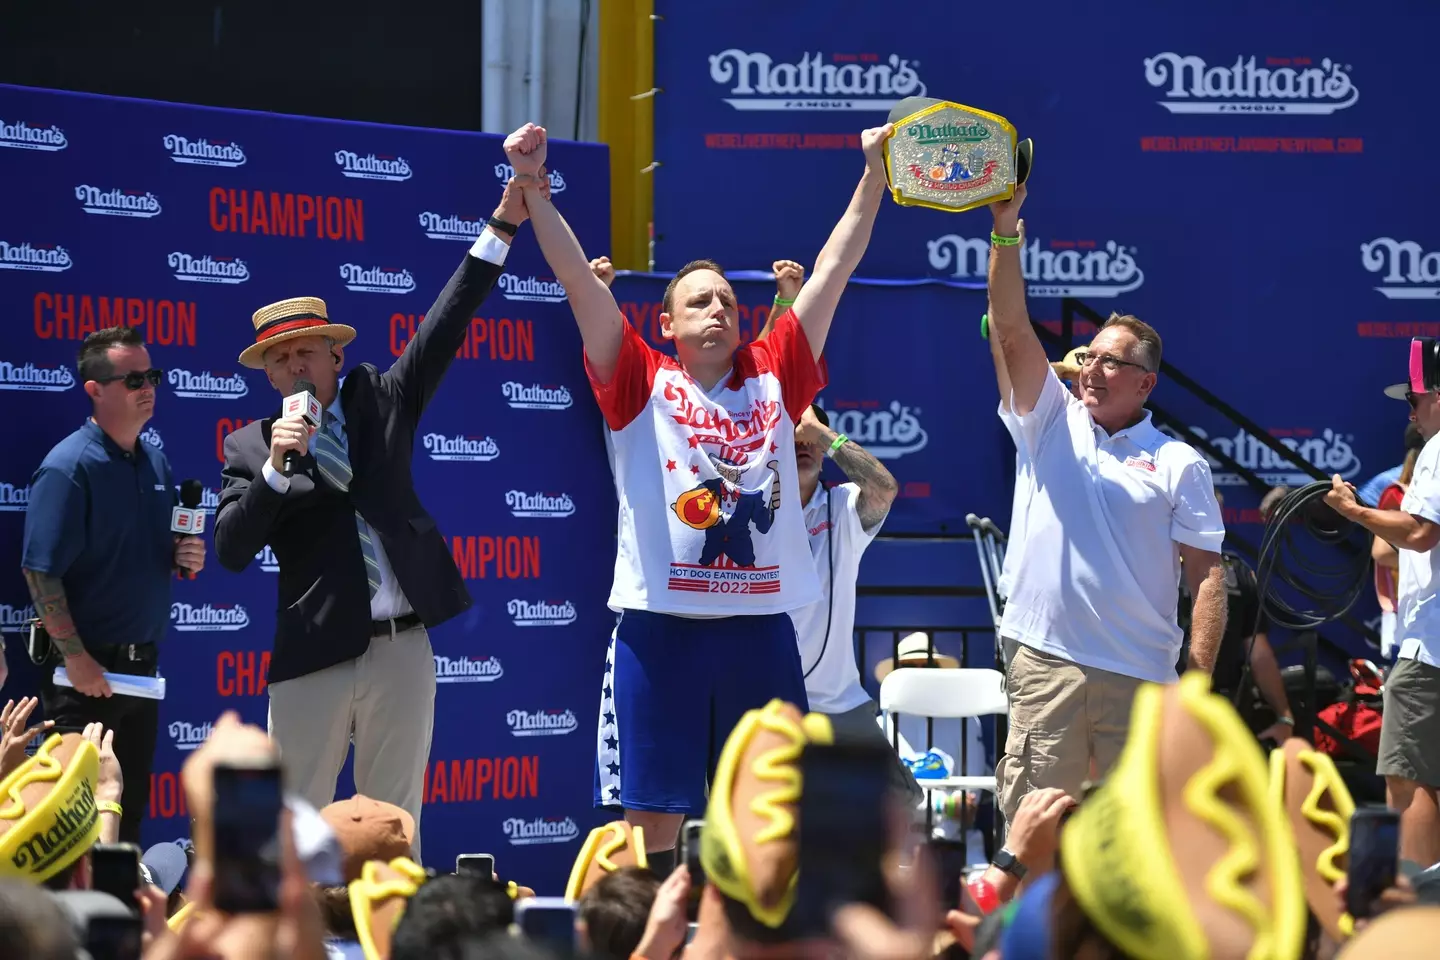 Joey Chestnut claimed his 15th title this week.